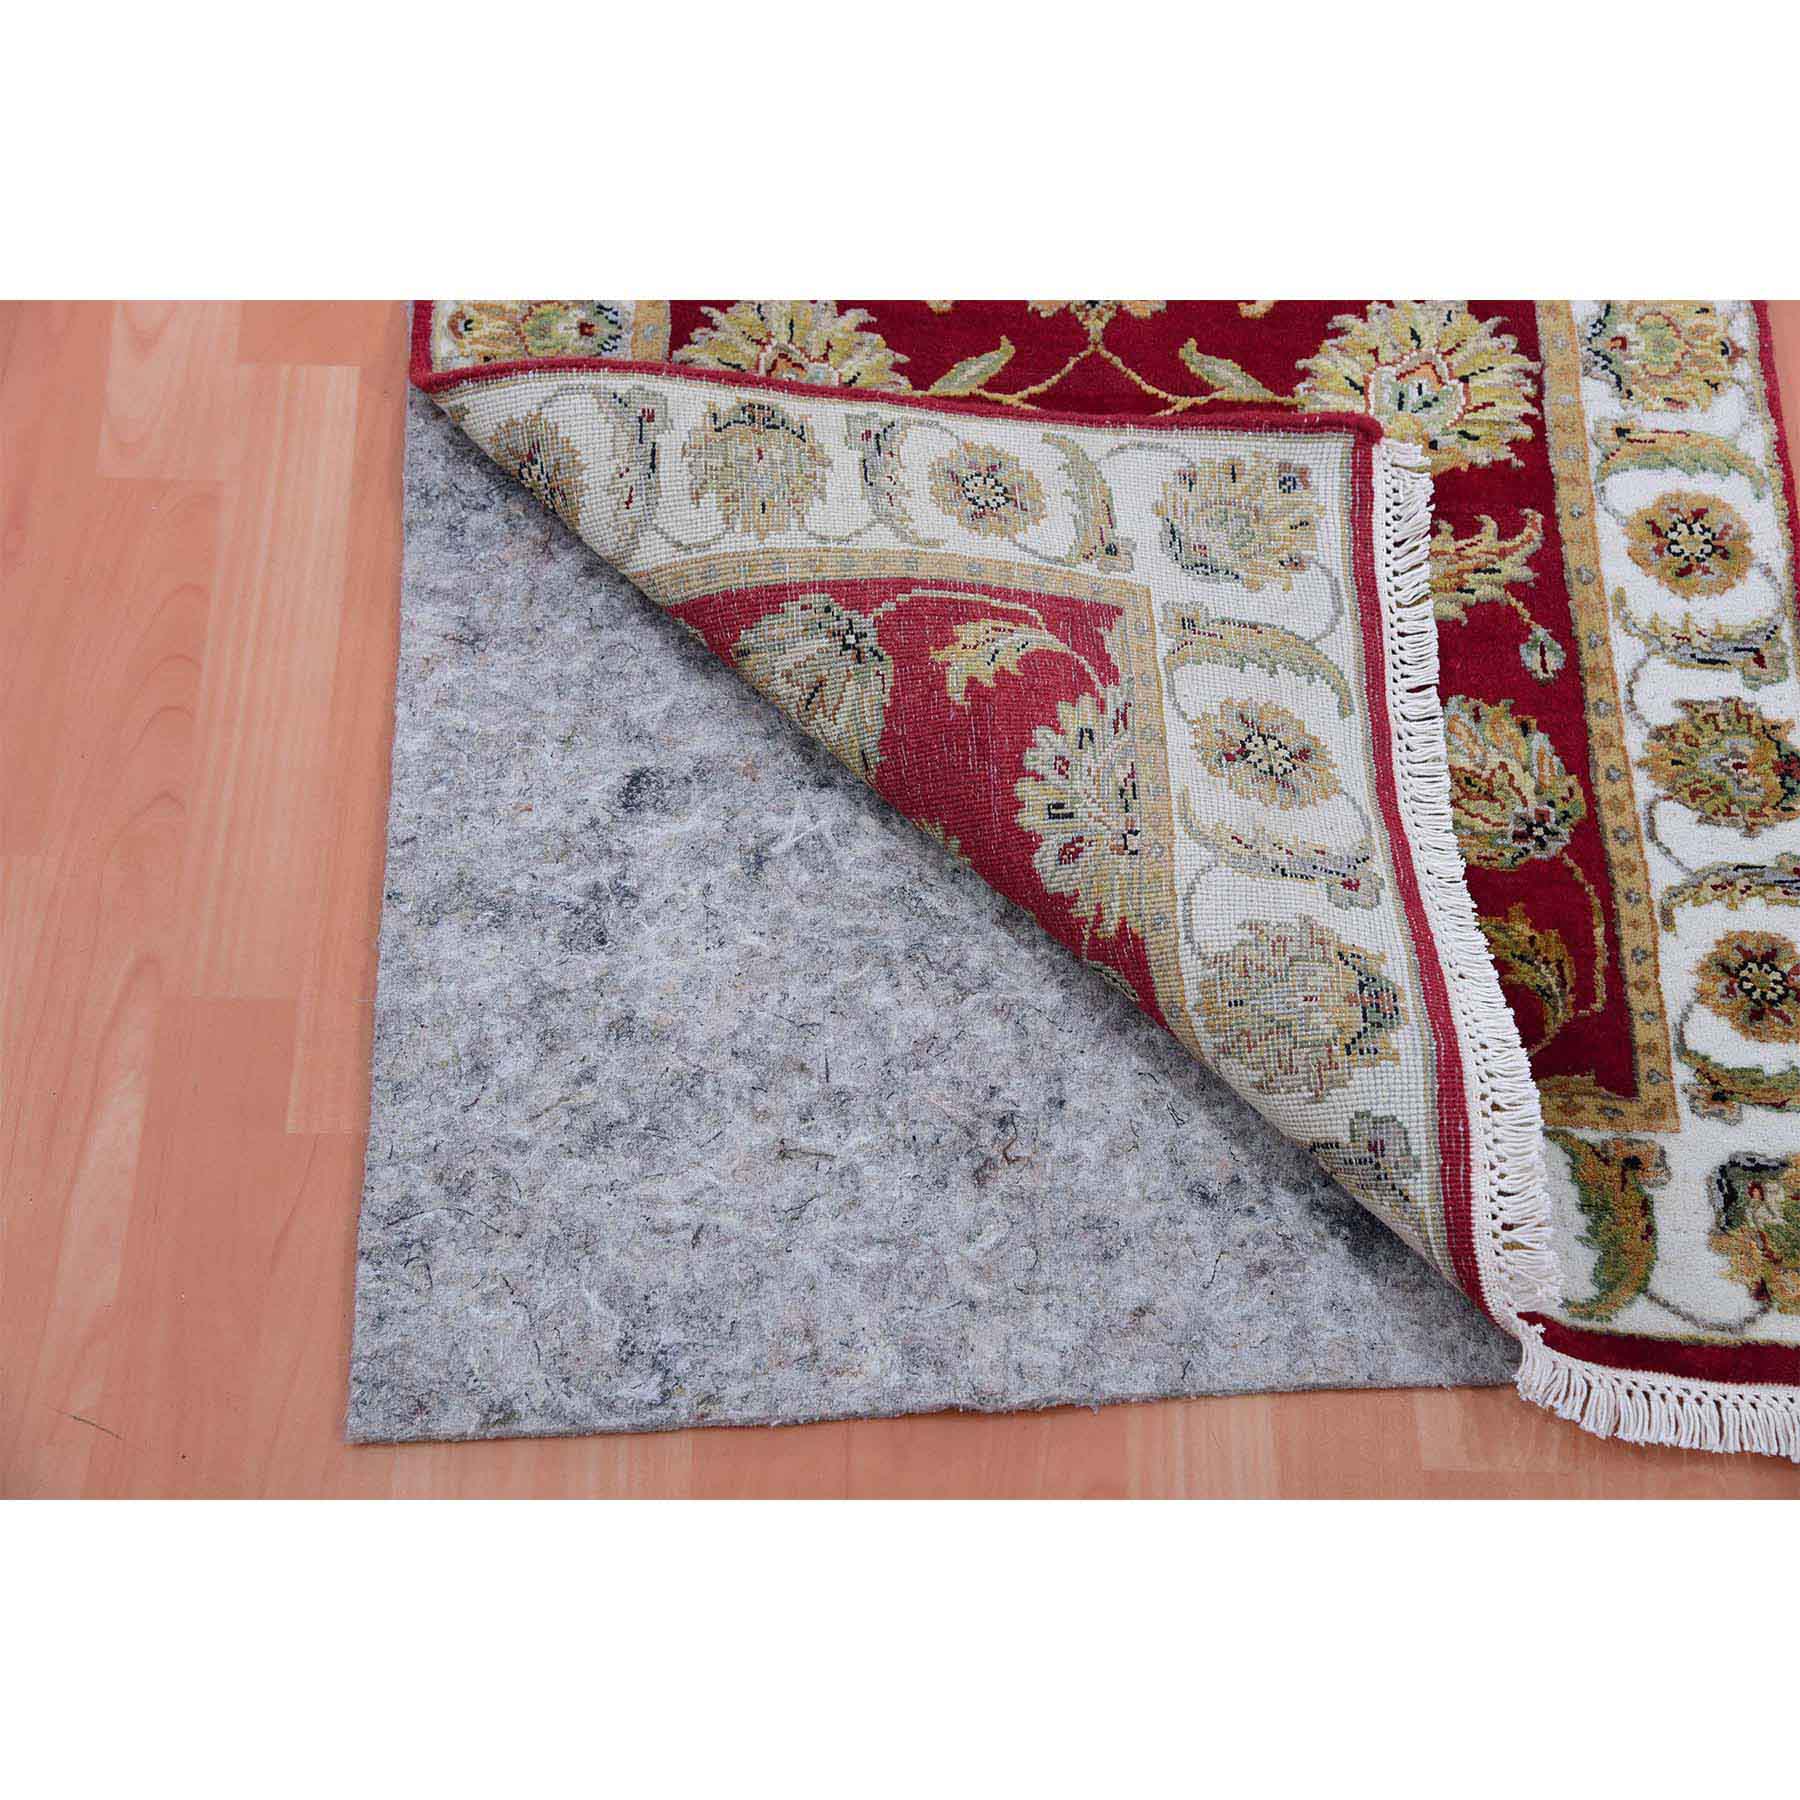 Rajasthan-Hand-Knotted-Rug-376870